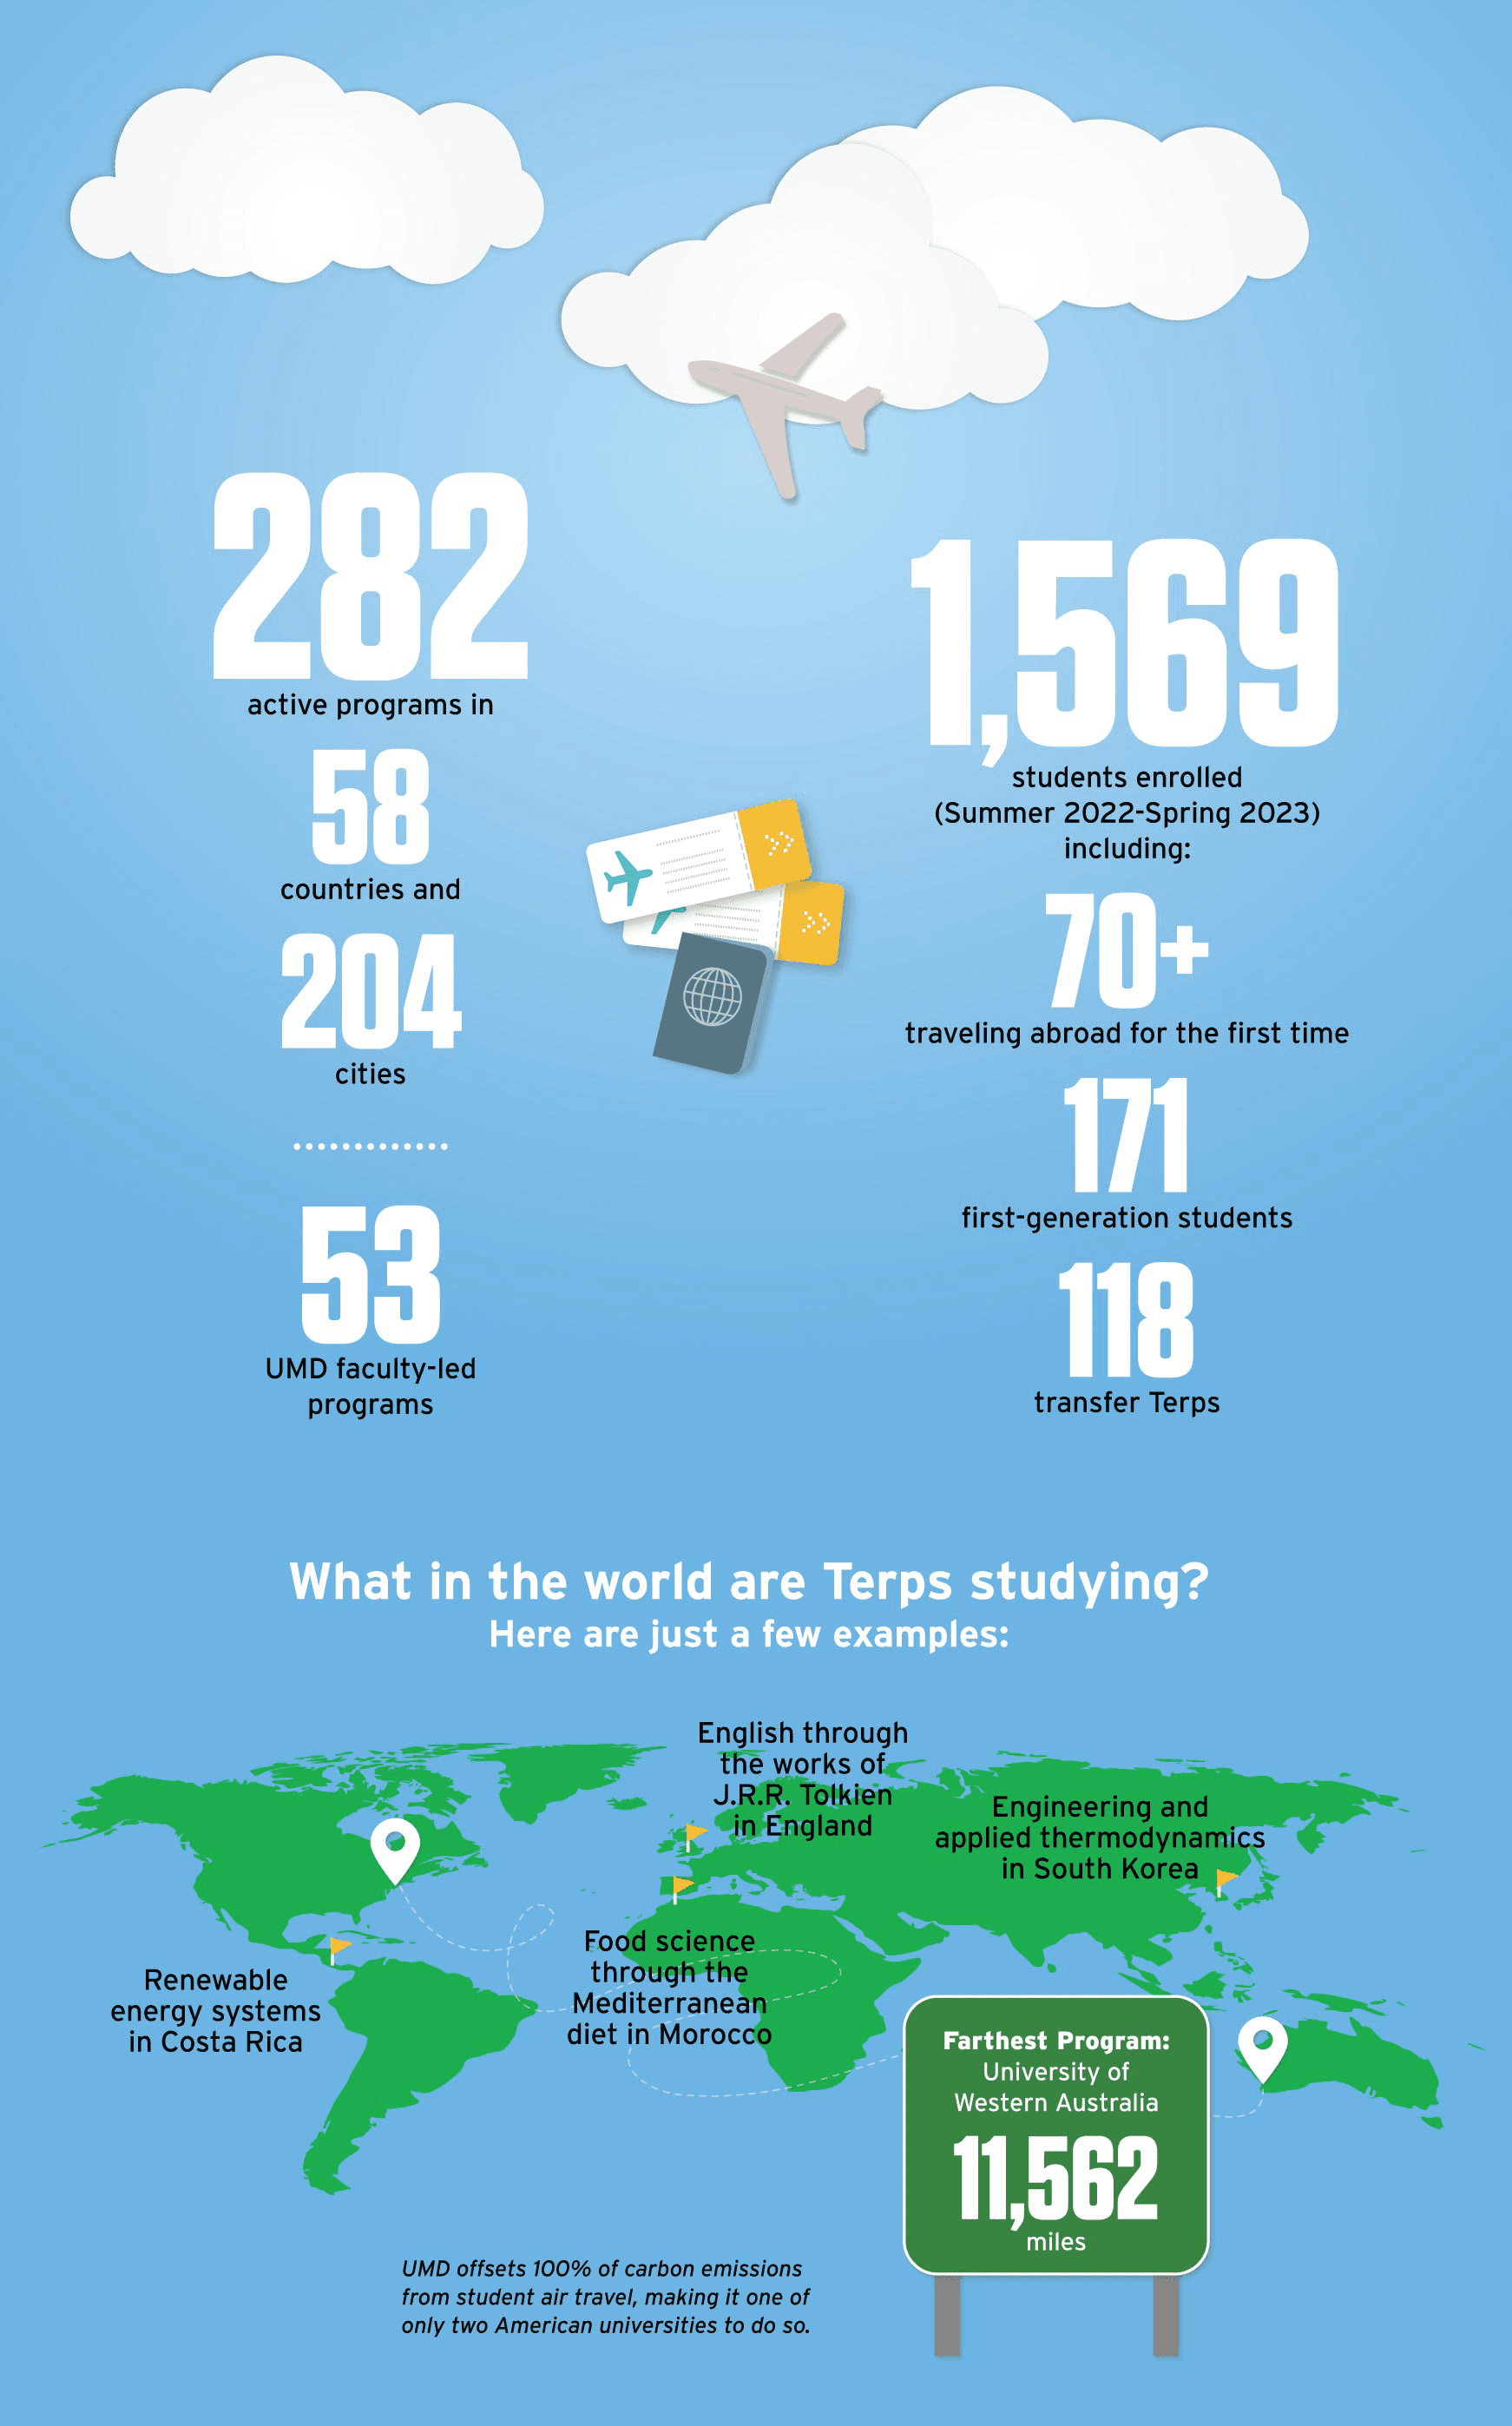 Infographic: 282 active programs in 58 countries and 204 cities. 53 UMD faculty-led programs. 1,569 students enrolled (Summer 2022-Spring 2023) including: 70+ traveling abroad for the first time, 171 first-generation students, 118 transfer Terps. What in the world are Terps studying? Here are just a few examples: Renewable energy systems in Costa Rica, food science through the Mediterranean diet in Morocco, English through the works of J.R.R. Tolkien in England, engineering and applied thermodynamics in South Korea. Farthest program: University of Western Australia, 11,562 miles. UMD offsets 100% of carbon emissions from student air travel, making it one of only two American universities to do so.